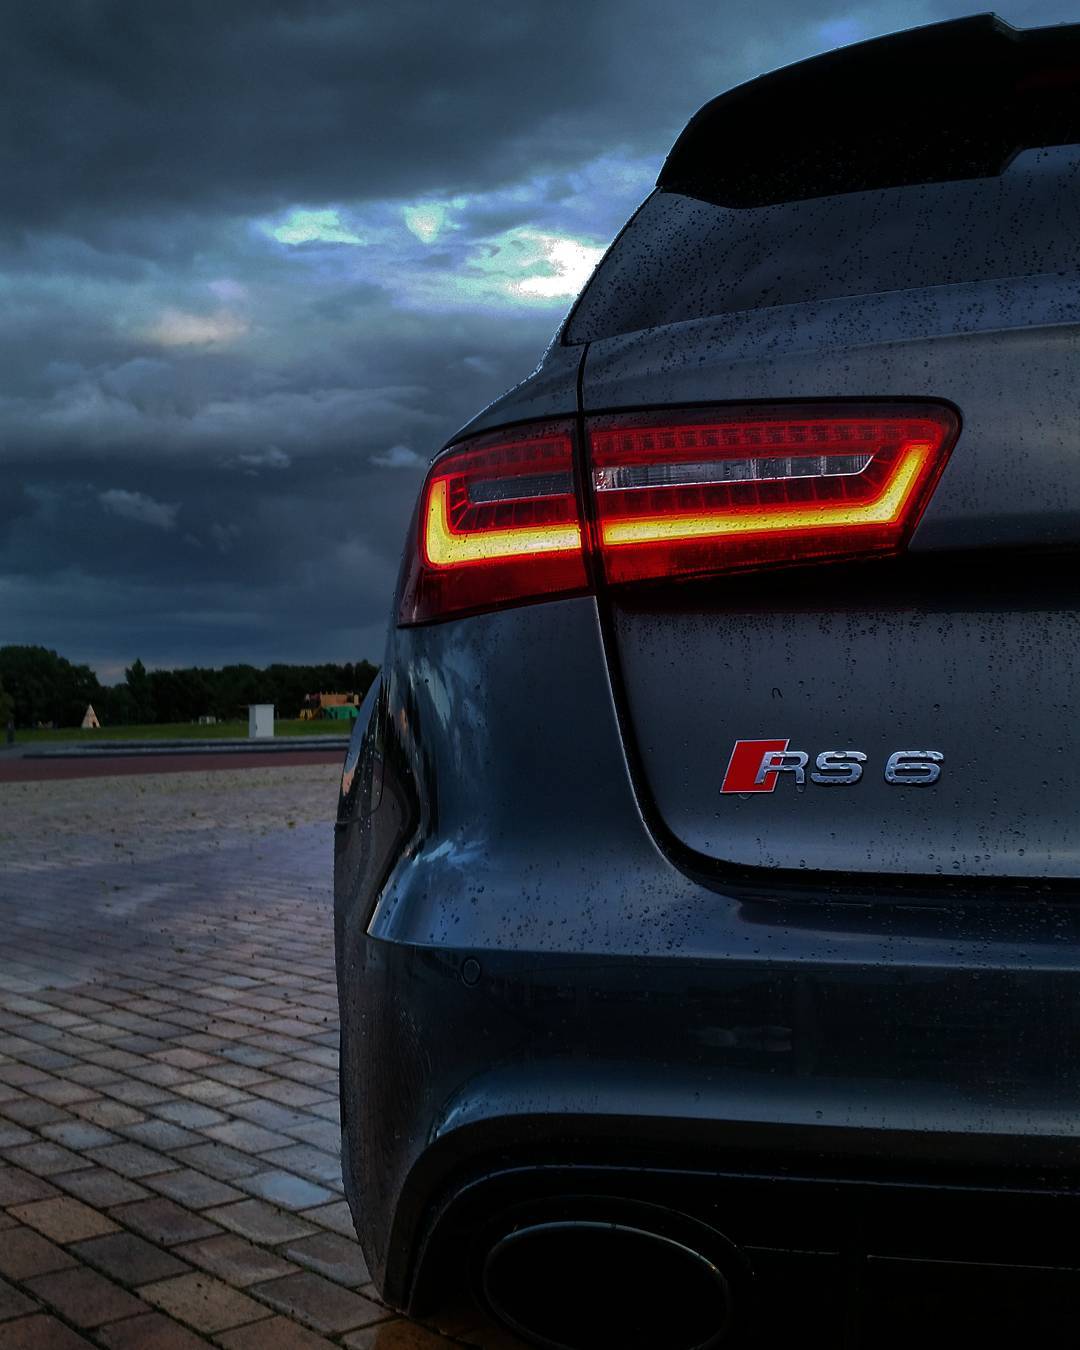 RS6 iPhone Background. Smartphone Car Wallpaper